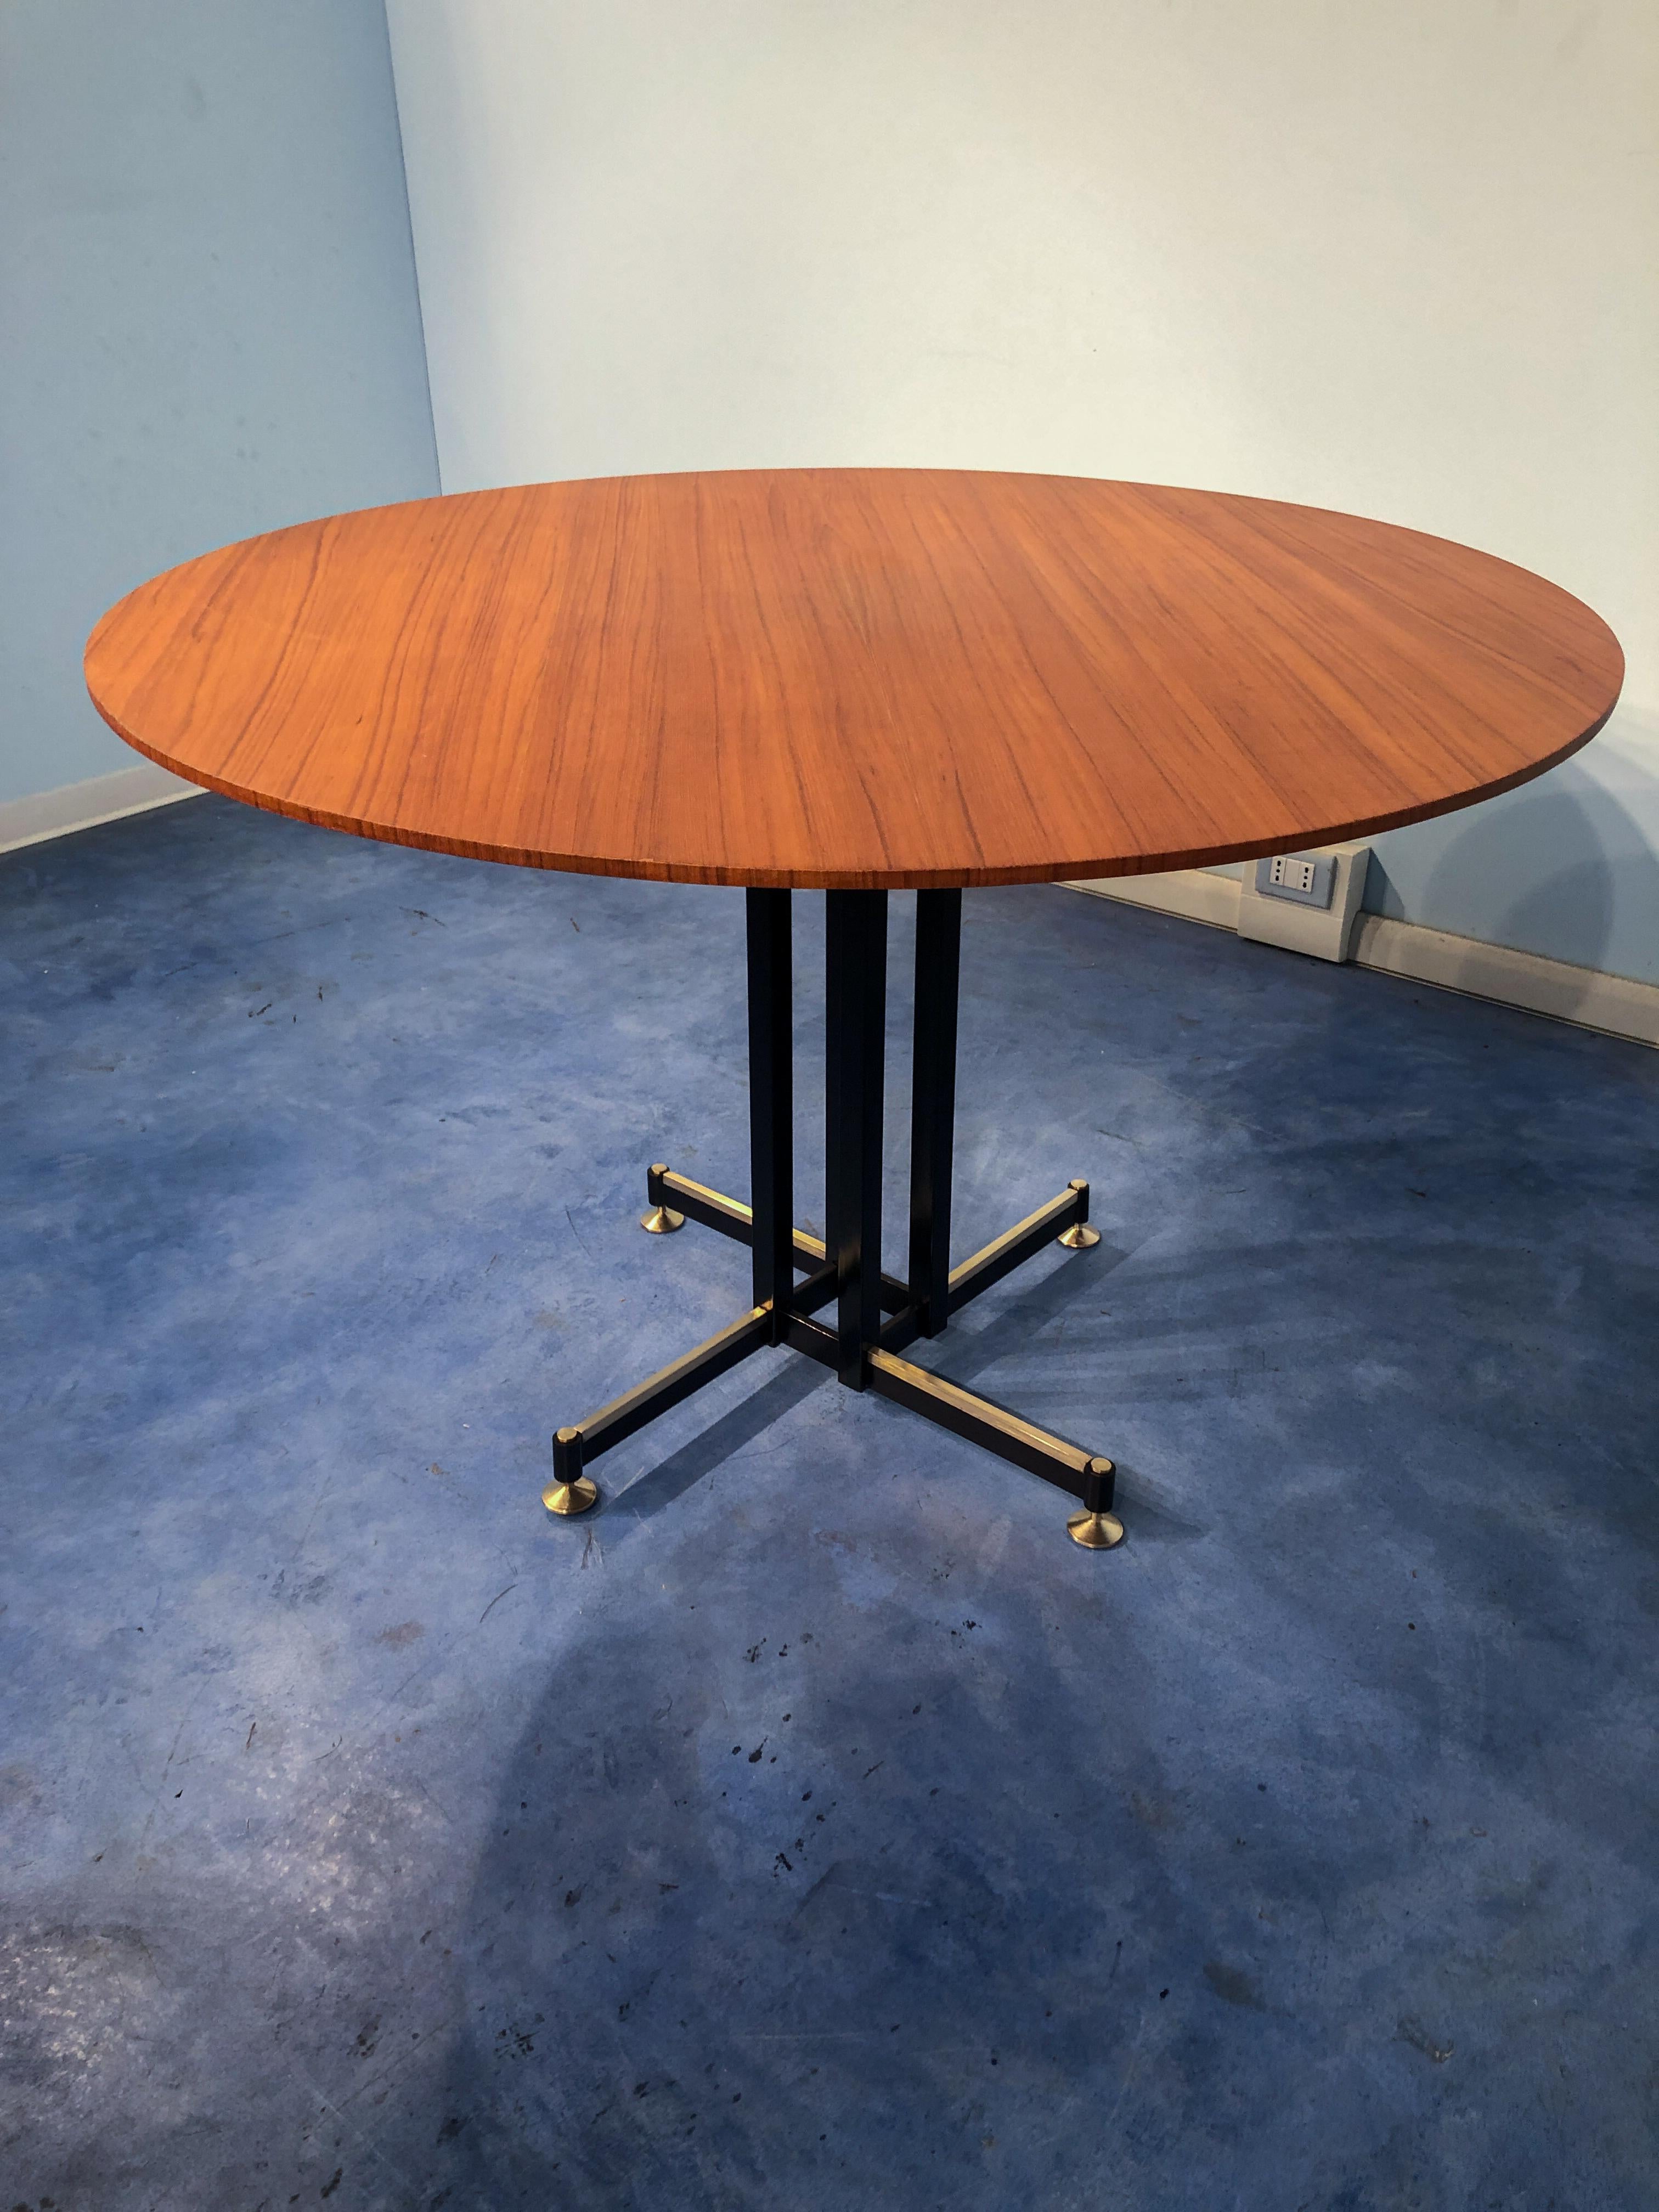 Italian midcentury teak veneer dining table, beautiful black architectural base with precious brass feet that can adjust for height and leveling purposes, round teak wooden top with really nice grain and color, completely restored very good